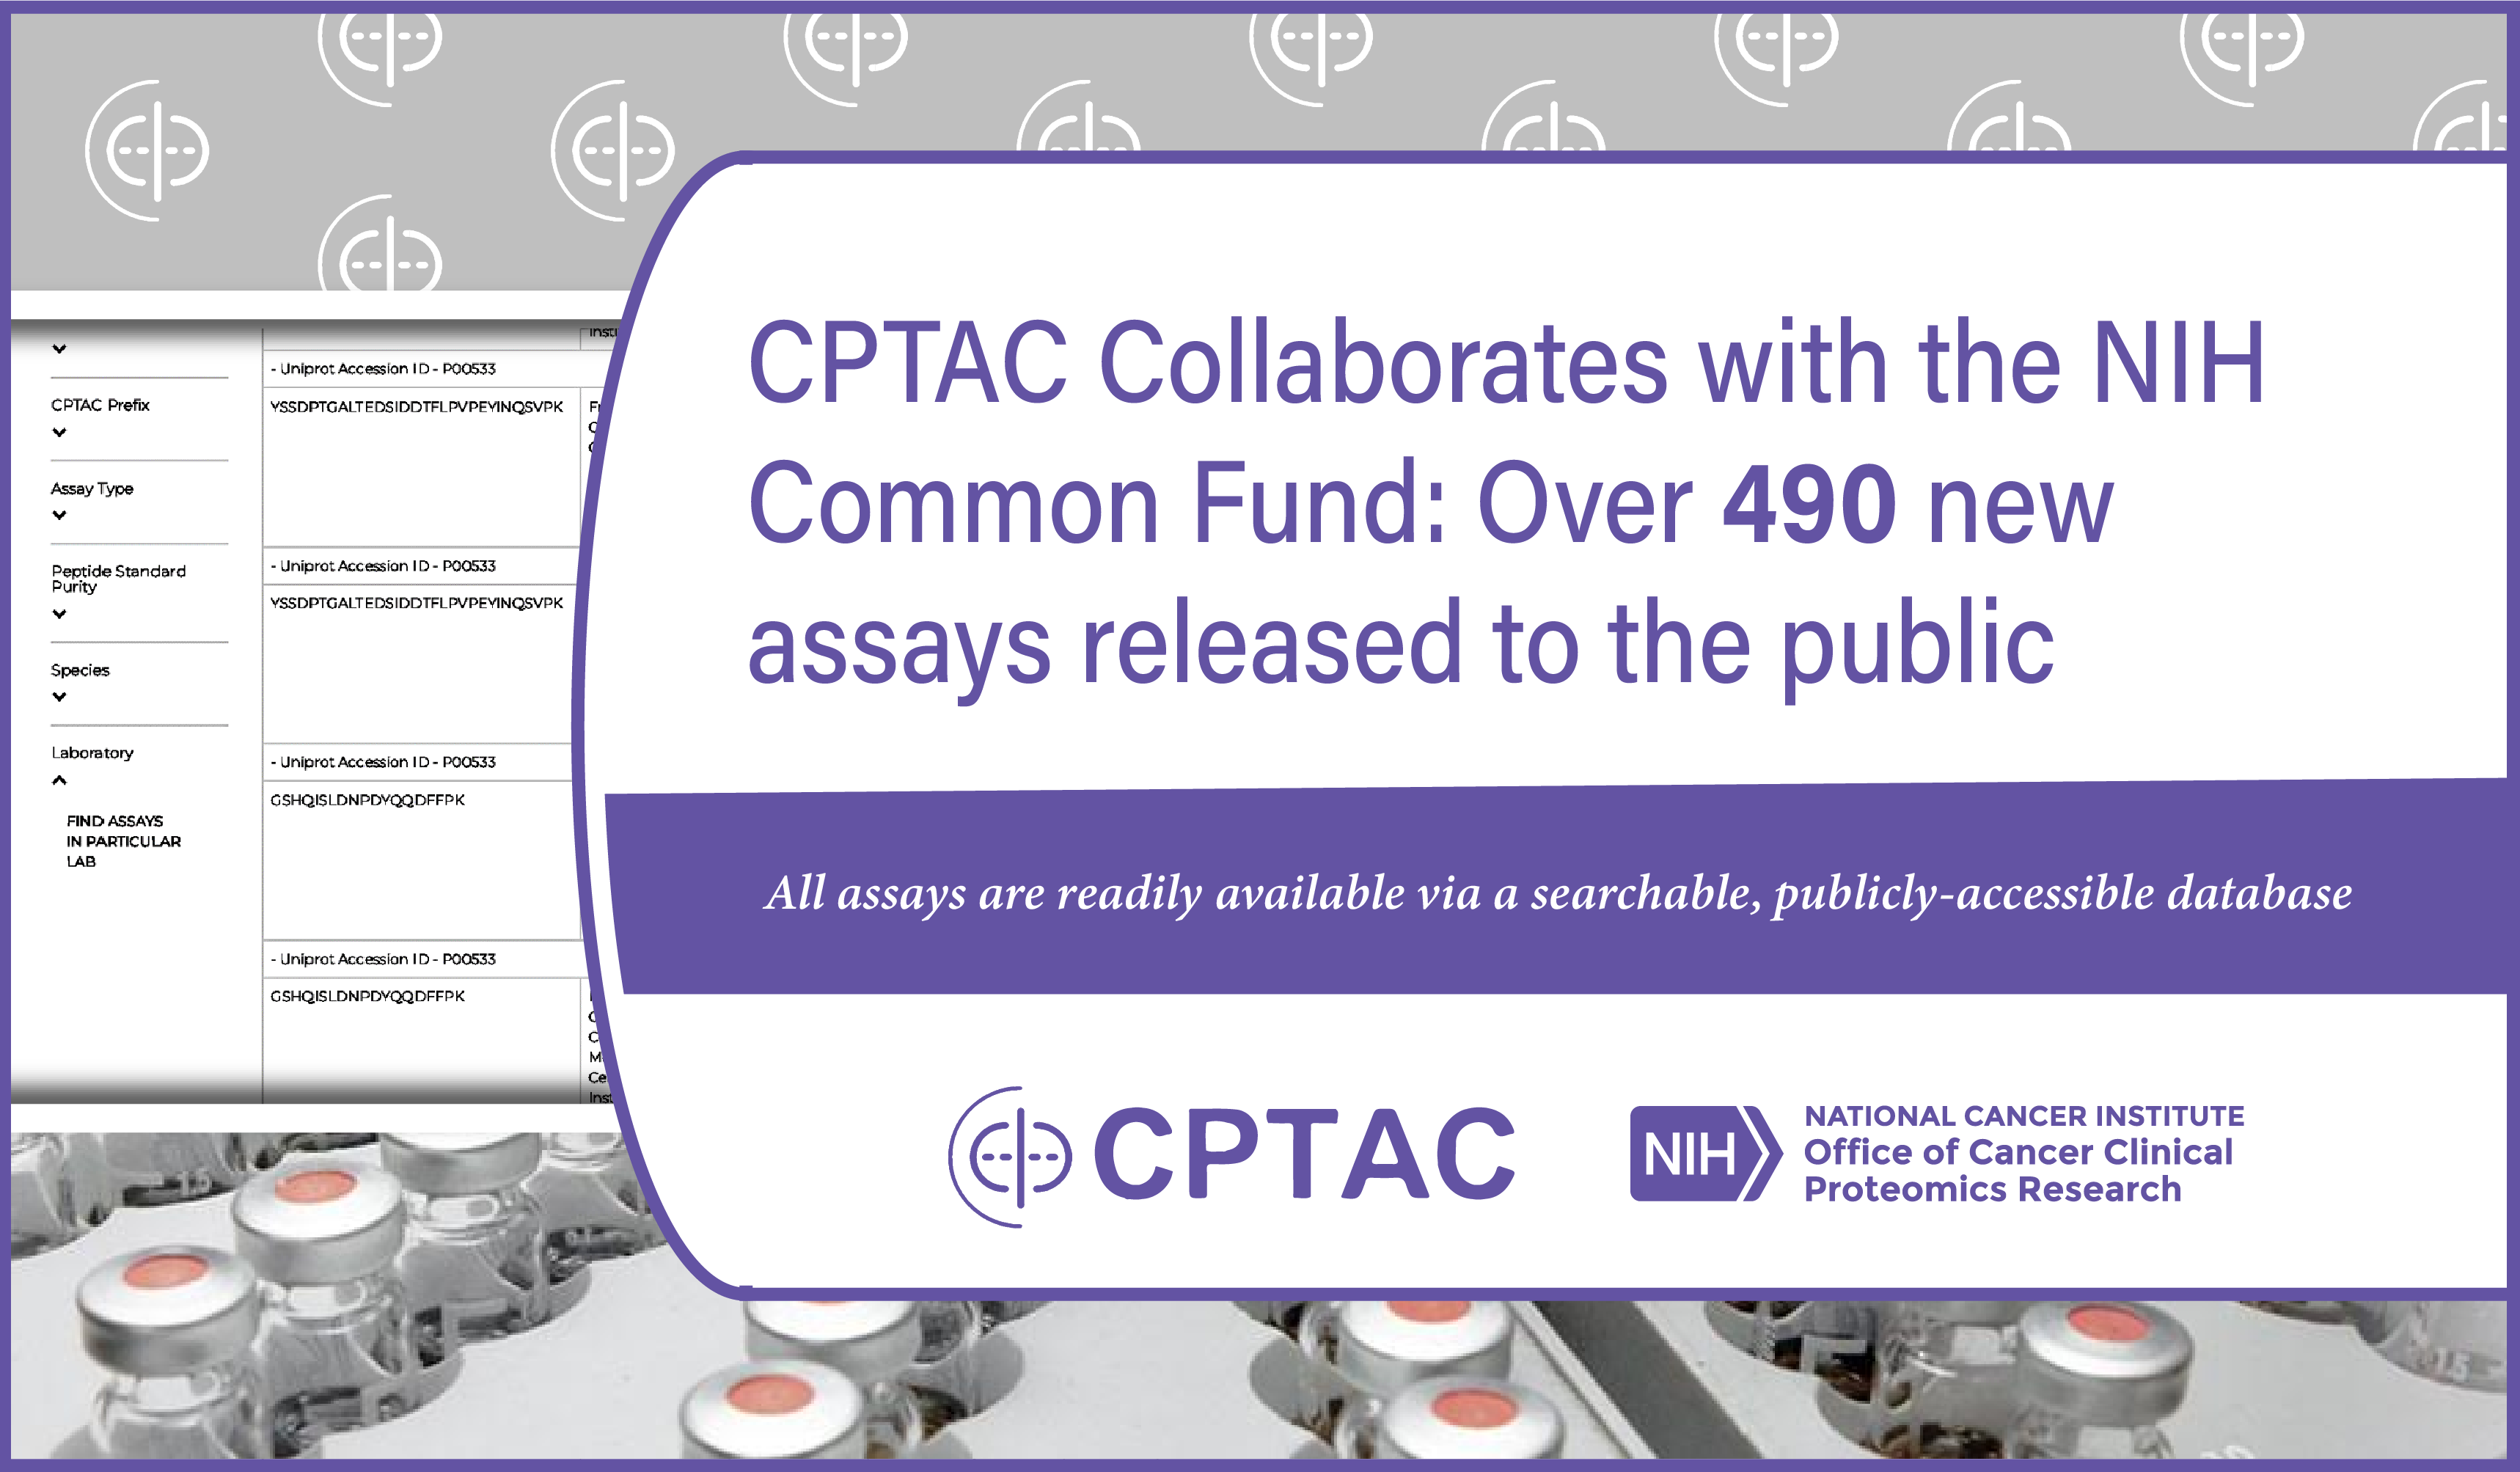 CPTAC Collaborates with the NIH Common Fund: Over 490 new assays released to the public.